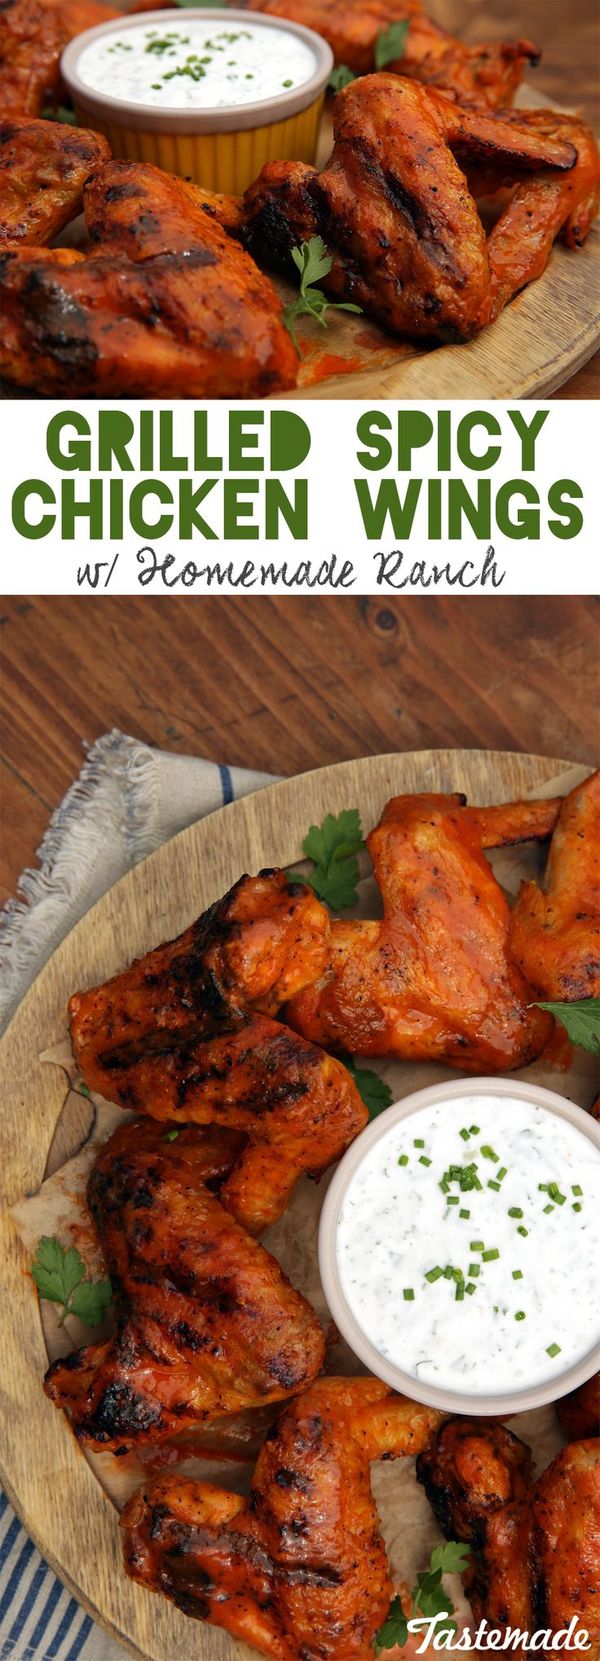 Grilled Spicy Chicken Wings with Homemade Ranch